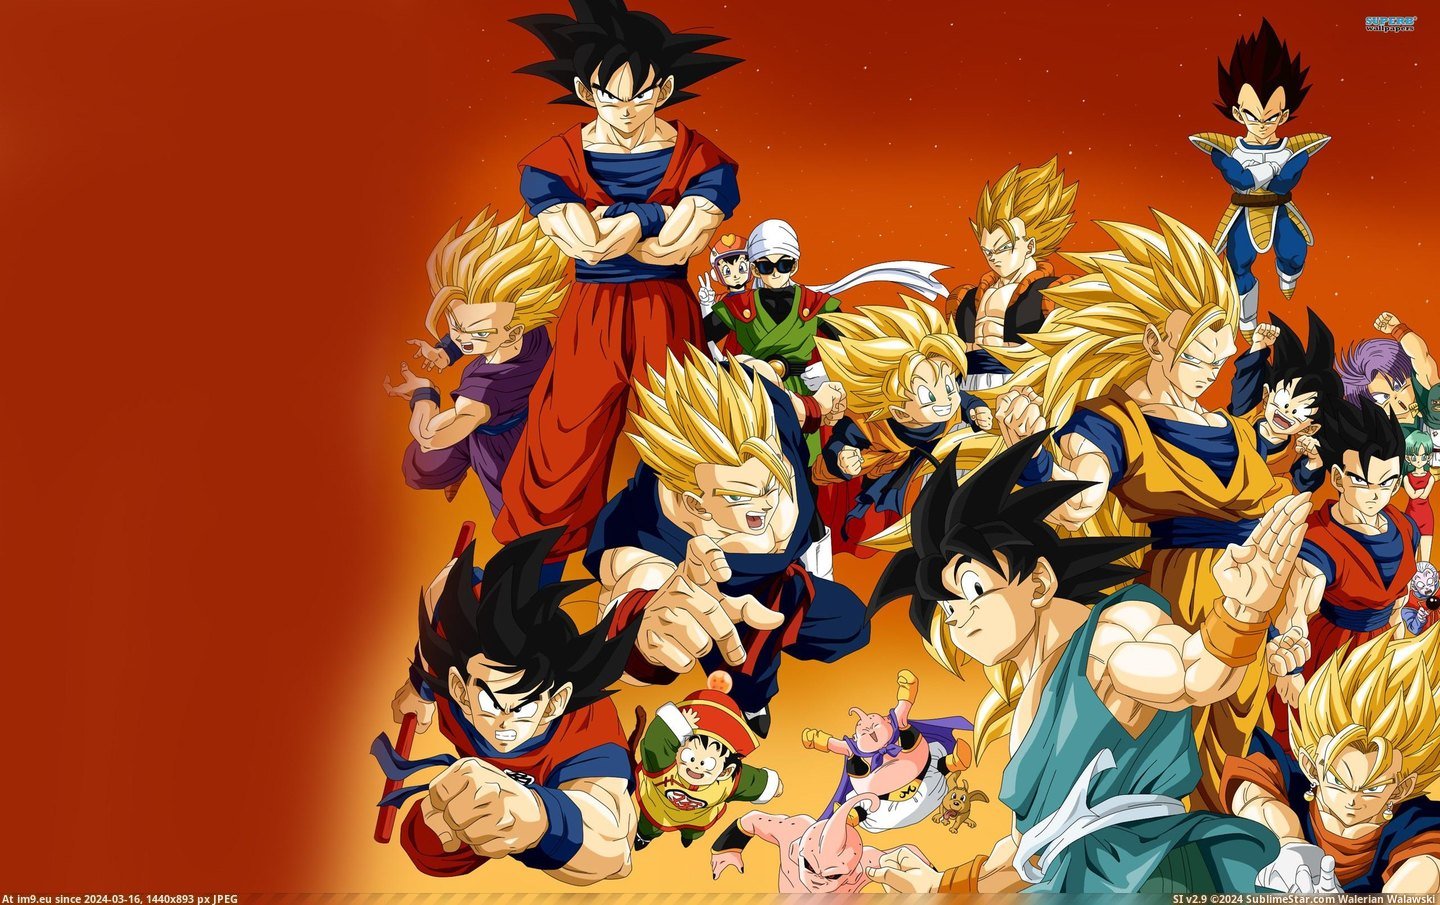 #Wallpapers  #Dragonball Dragonball Wallpapers 250 (HD) Pic. (Изображение из альбом HD Wallpapers - anime, games and abstract art/3D backgrounds))